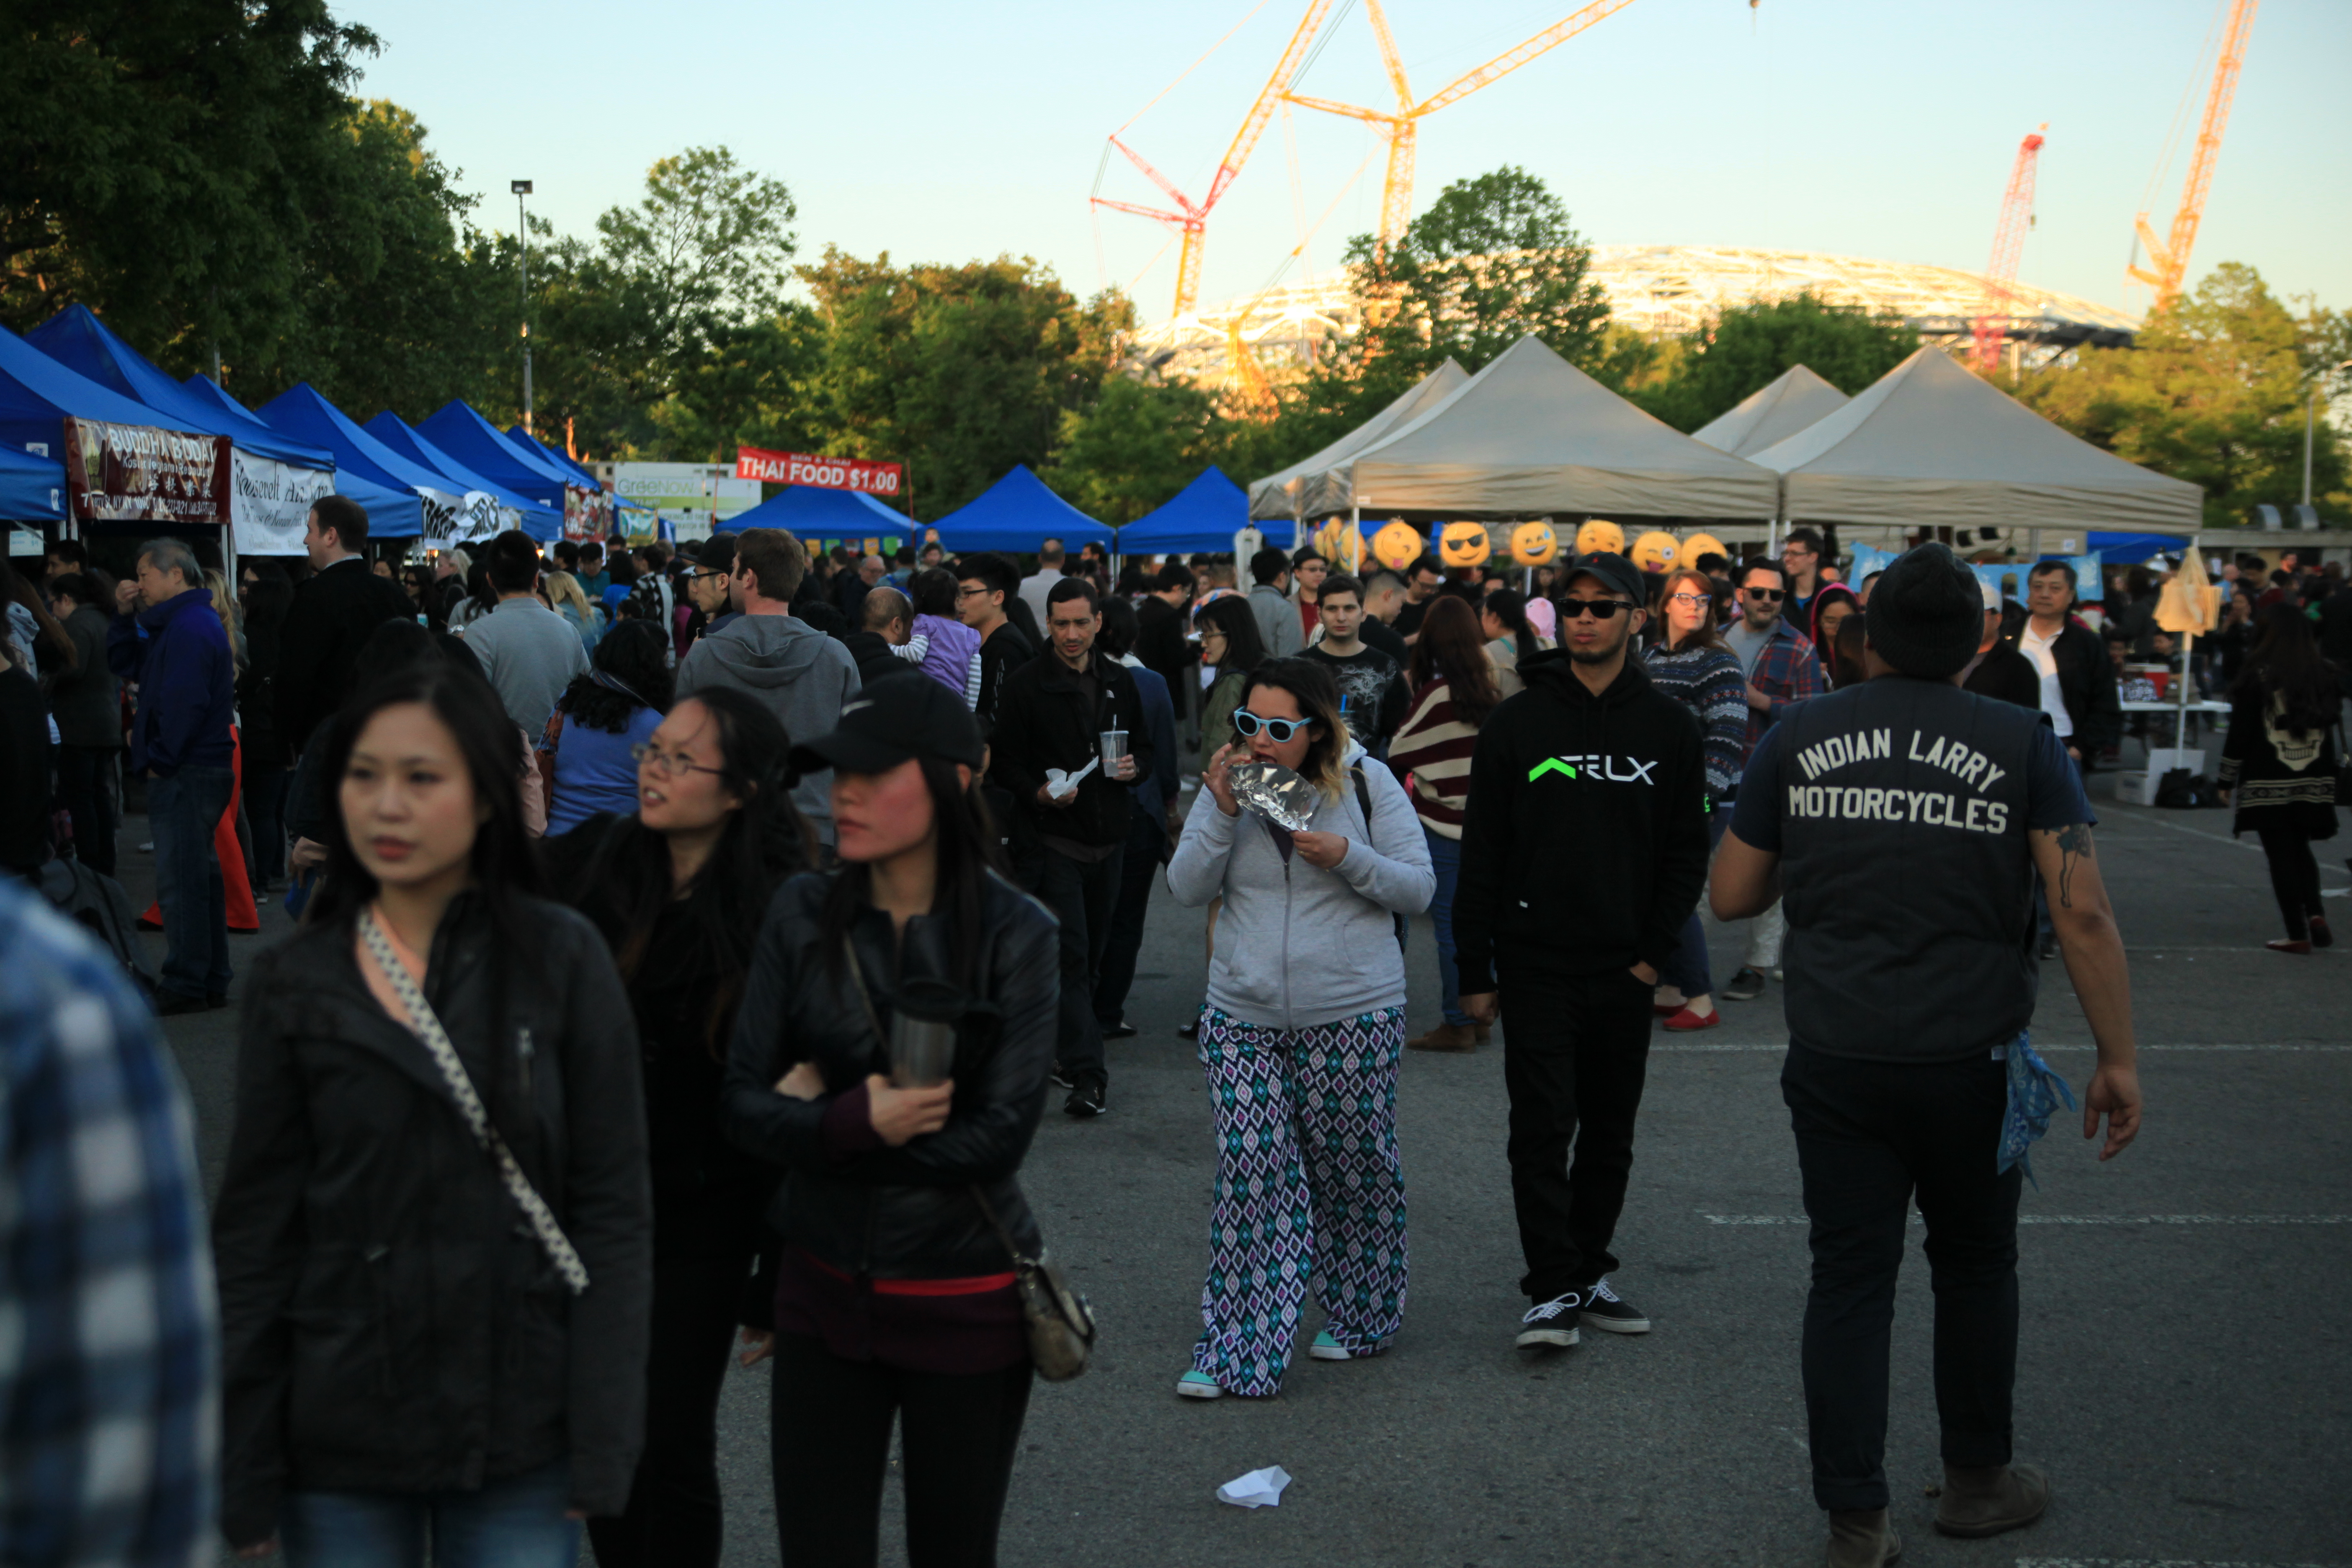 A group of people walking around the Queens Night Market at dusk.